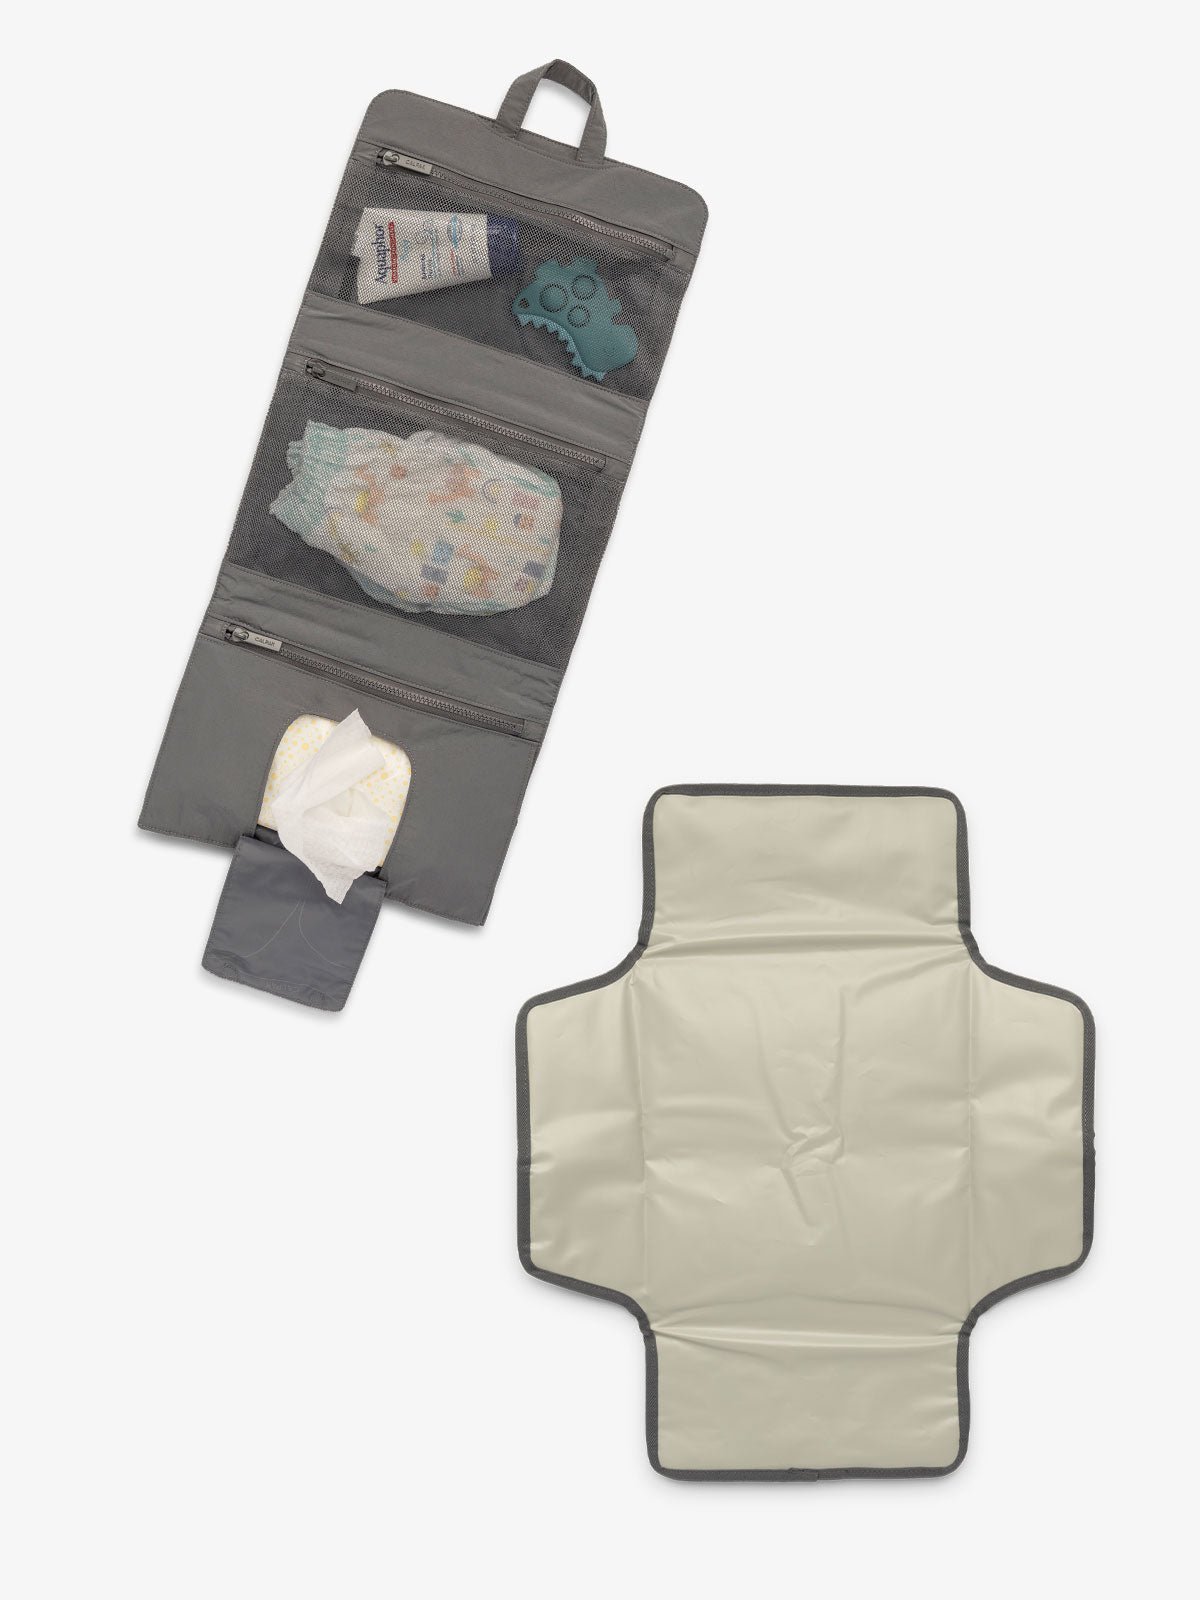 CALPAK portable changing pad includes multiple pockets, collapsing hanging hook, and detachable changing pad in gray